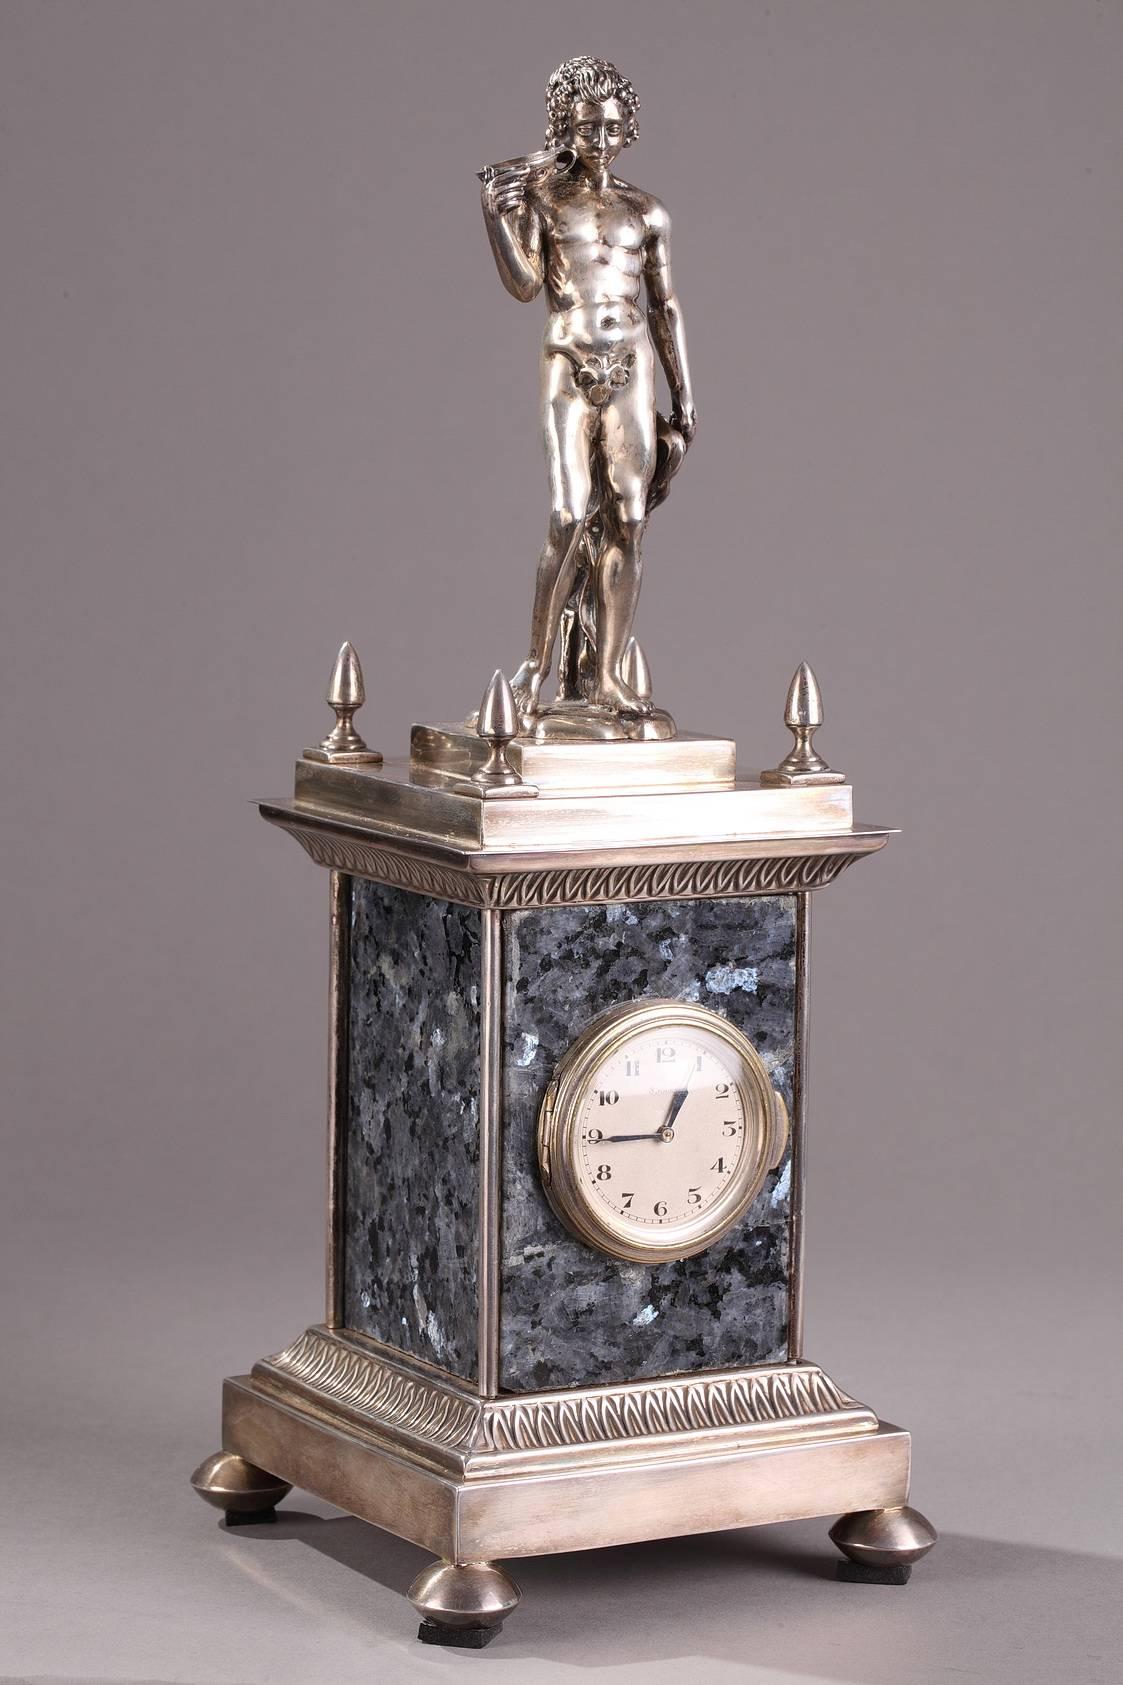 Silver and granite mantel clock topped with a young, nude Bacchus whose head is ringed with an ivy wreath. In Greco-Roman mythology Bacchus (Dionysus) is the god of wine, drunkenness, excess, and fertility. He holds a goblet of wine in one hand and